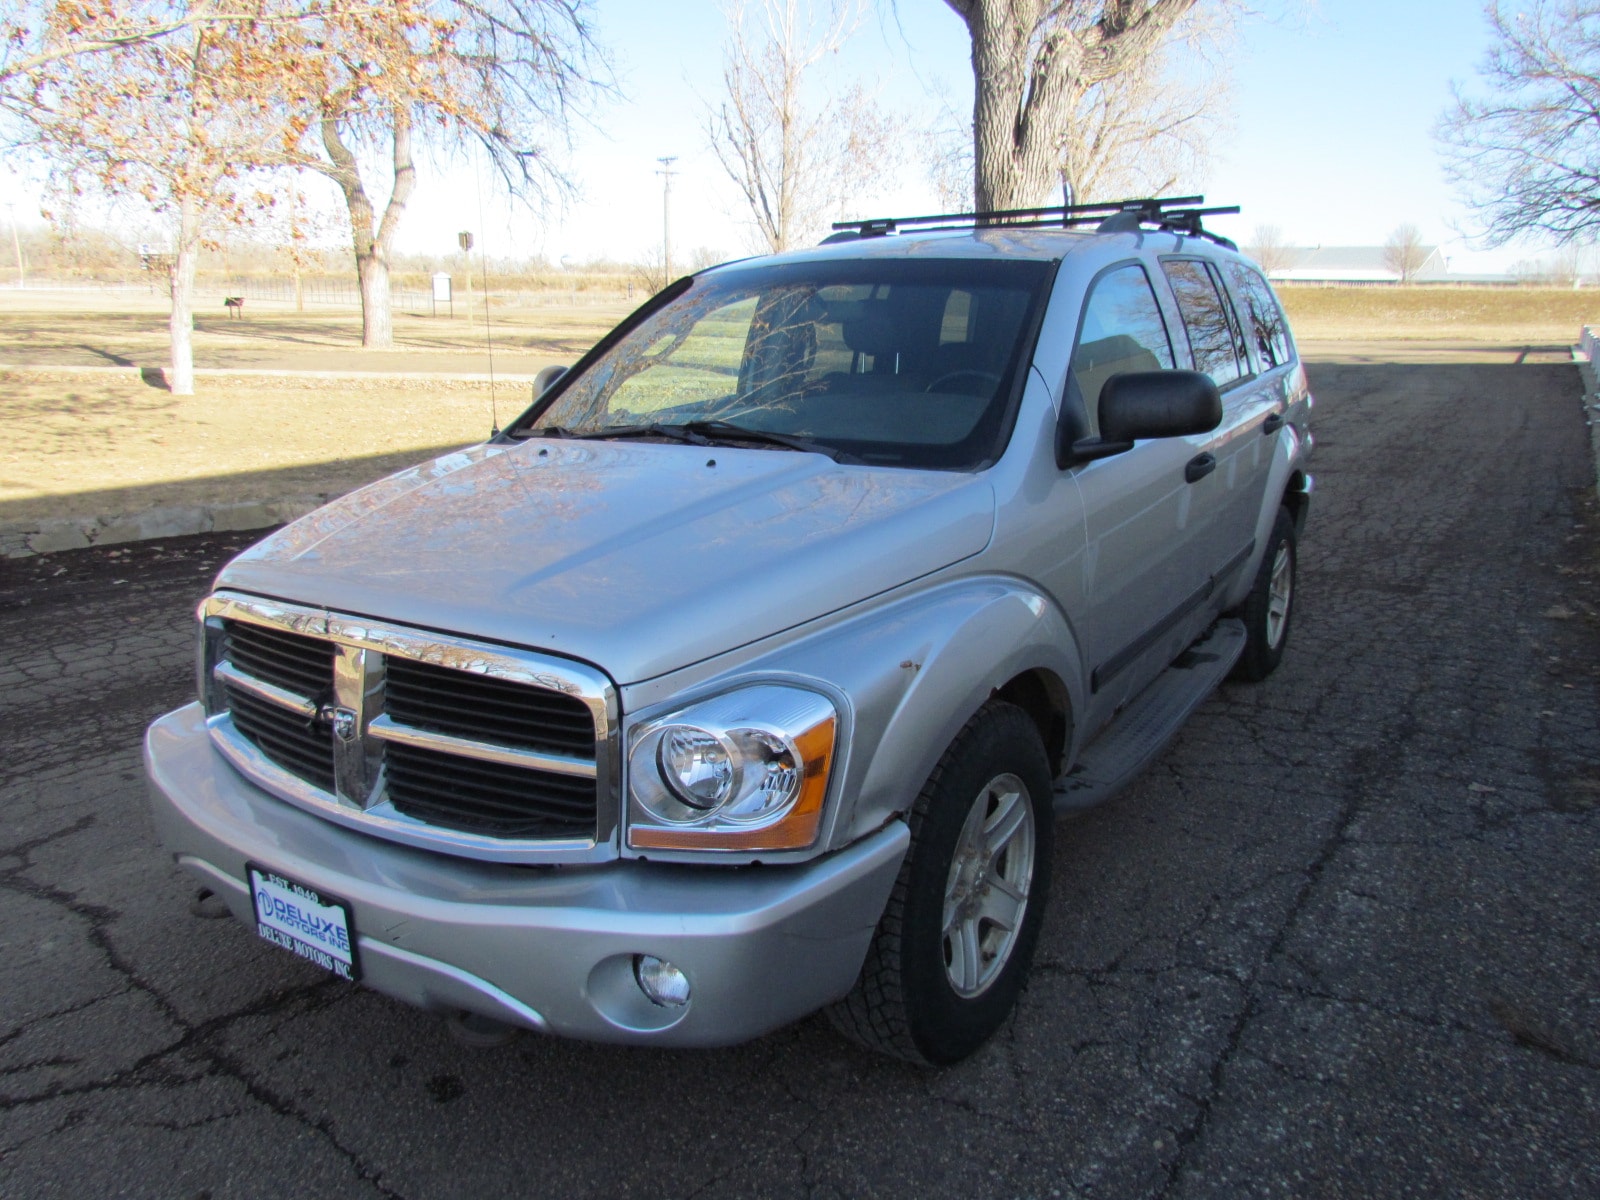 Used 2006 Dodge Durango SLT with VIN 1D4HB48N46F191256 for sale in Miles City, MT